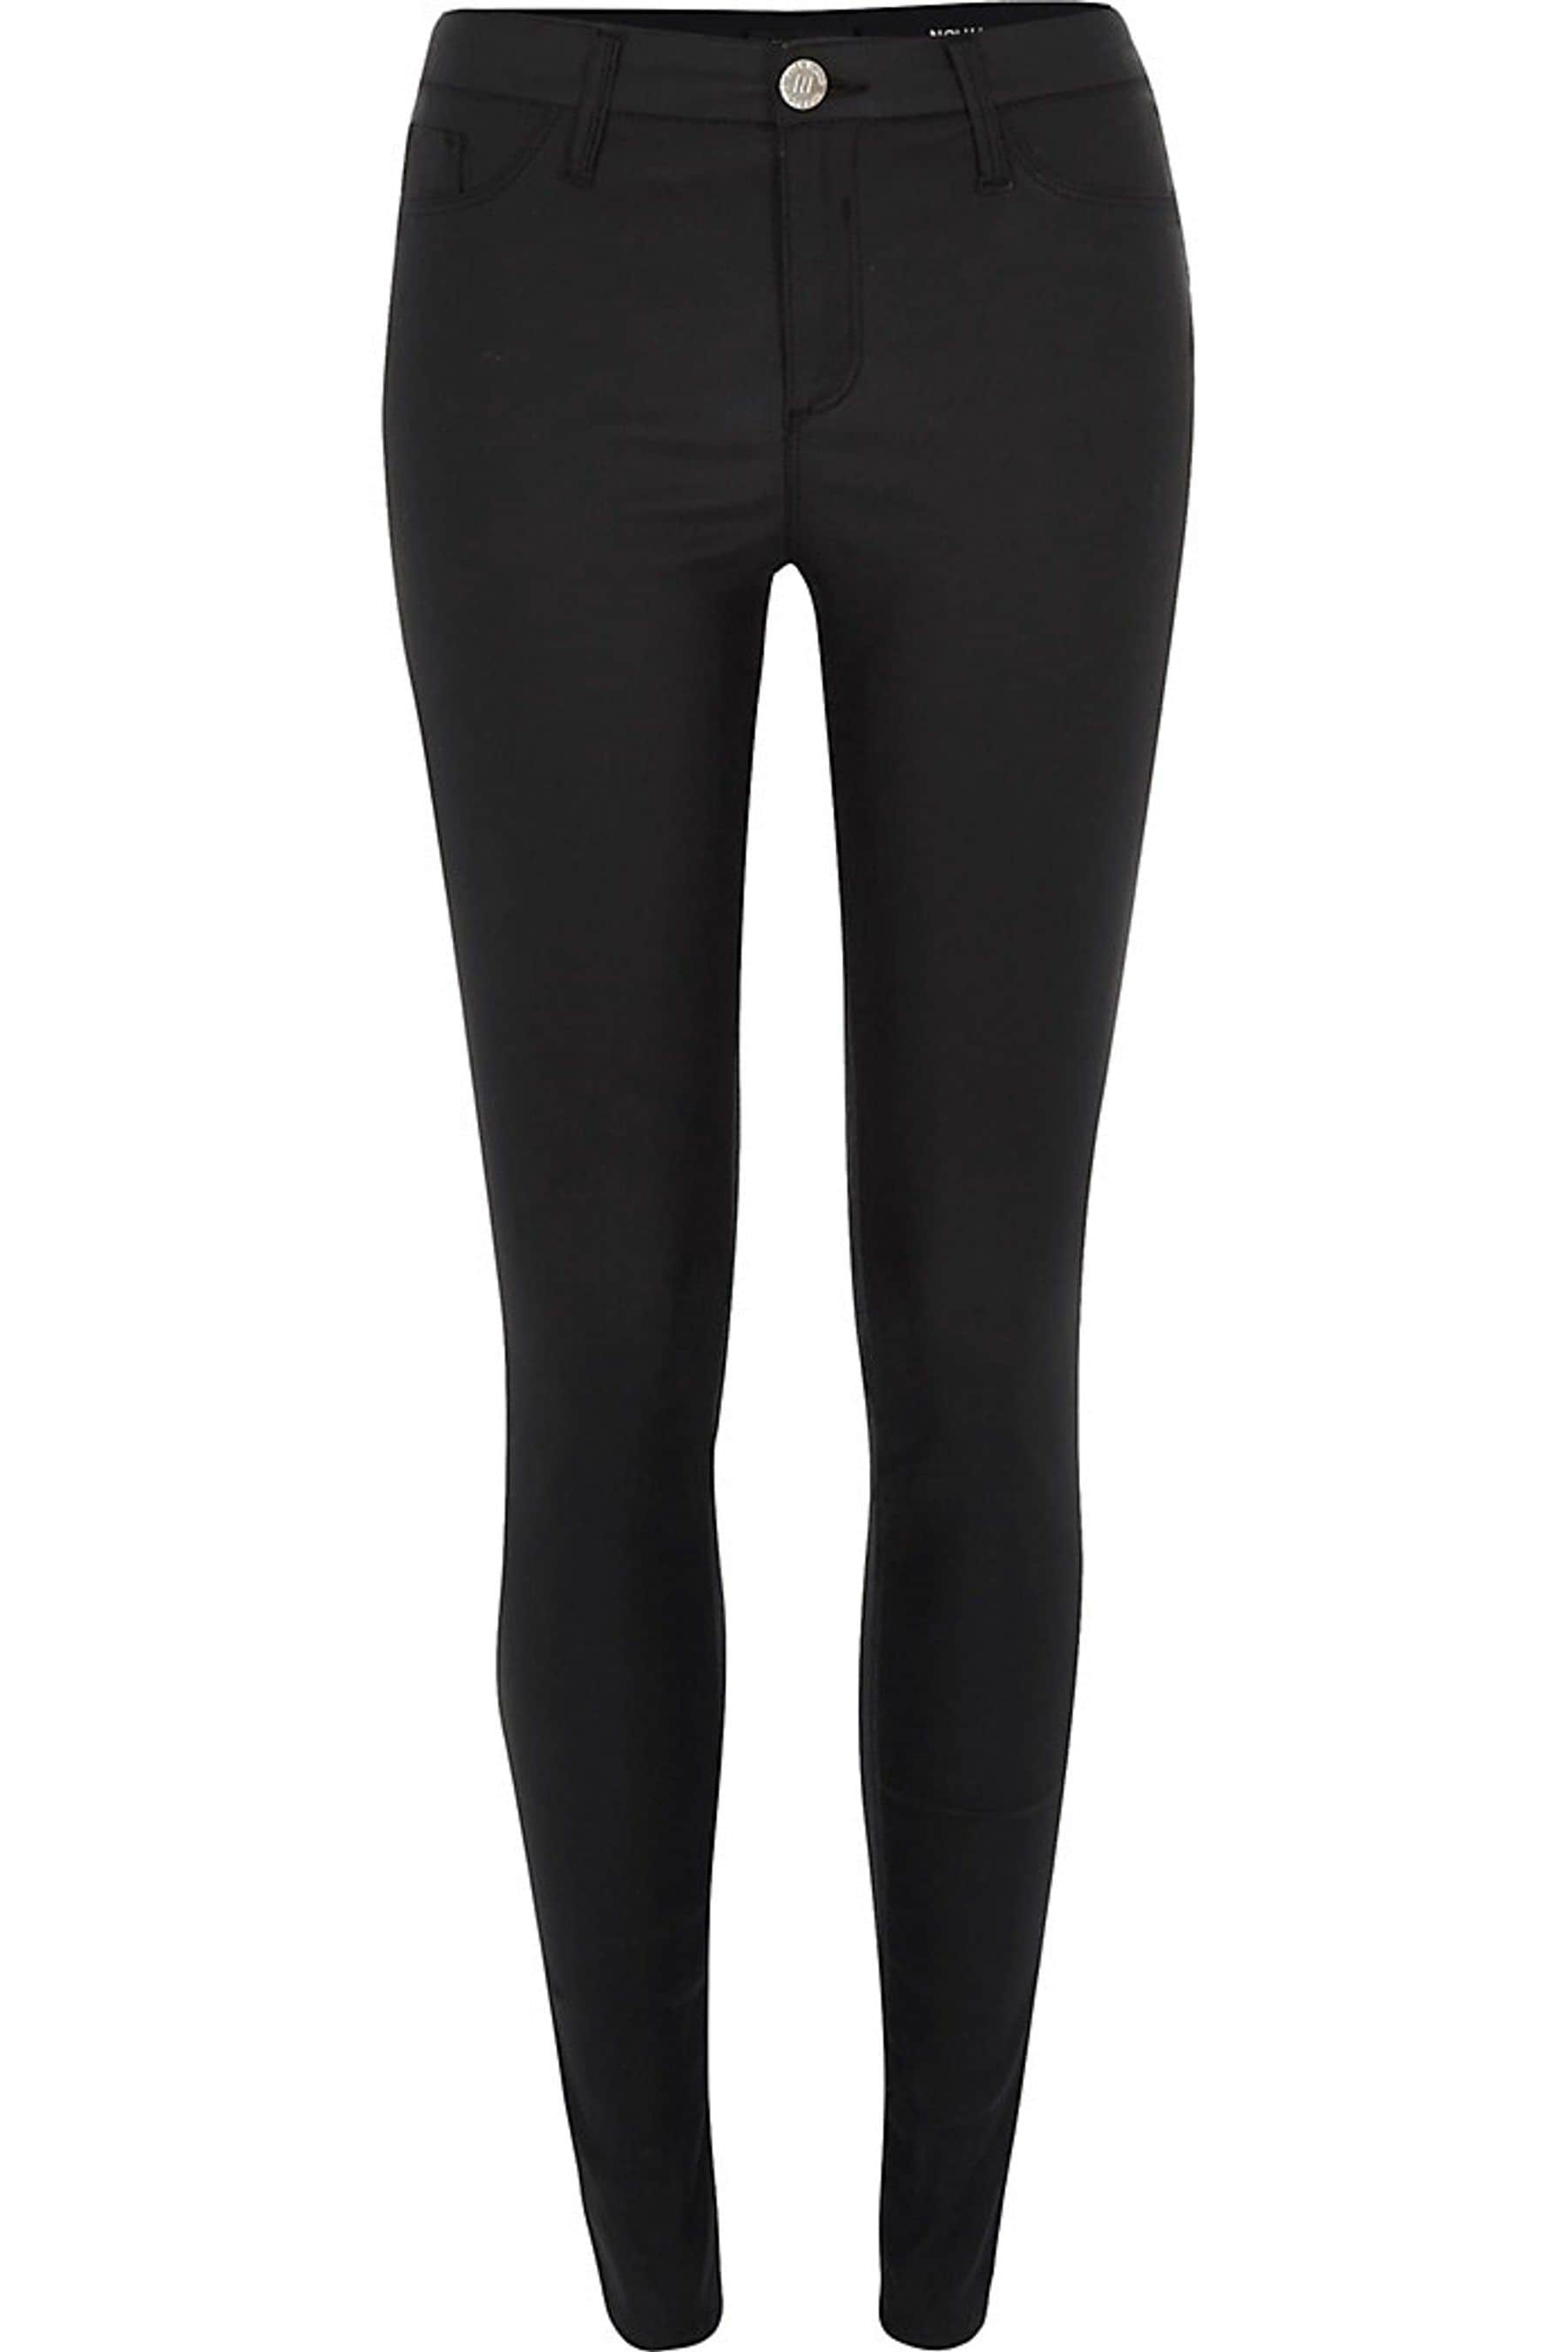 Buy River Island Black Mid Rise Super Stretch Coated Skinny Jeans from ...